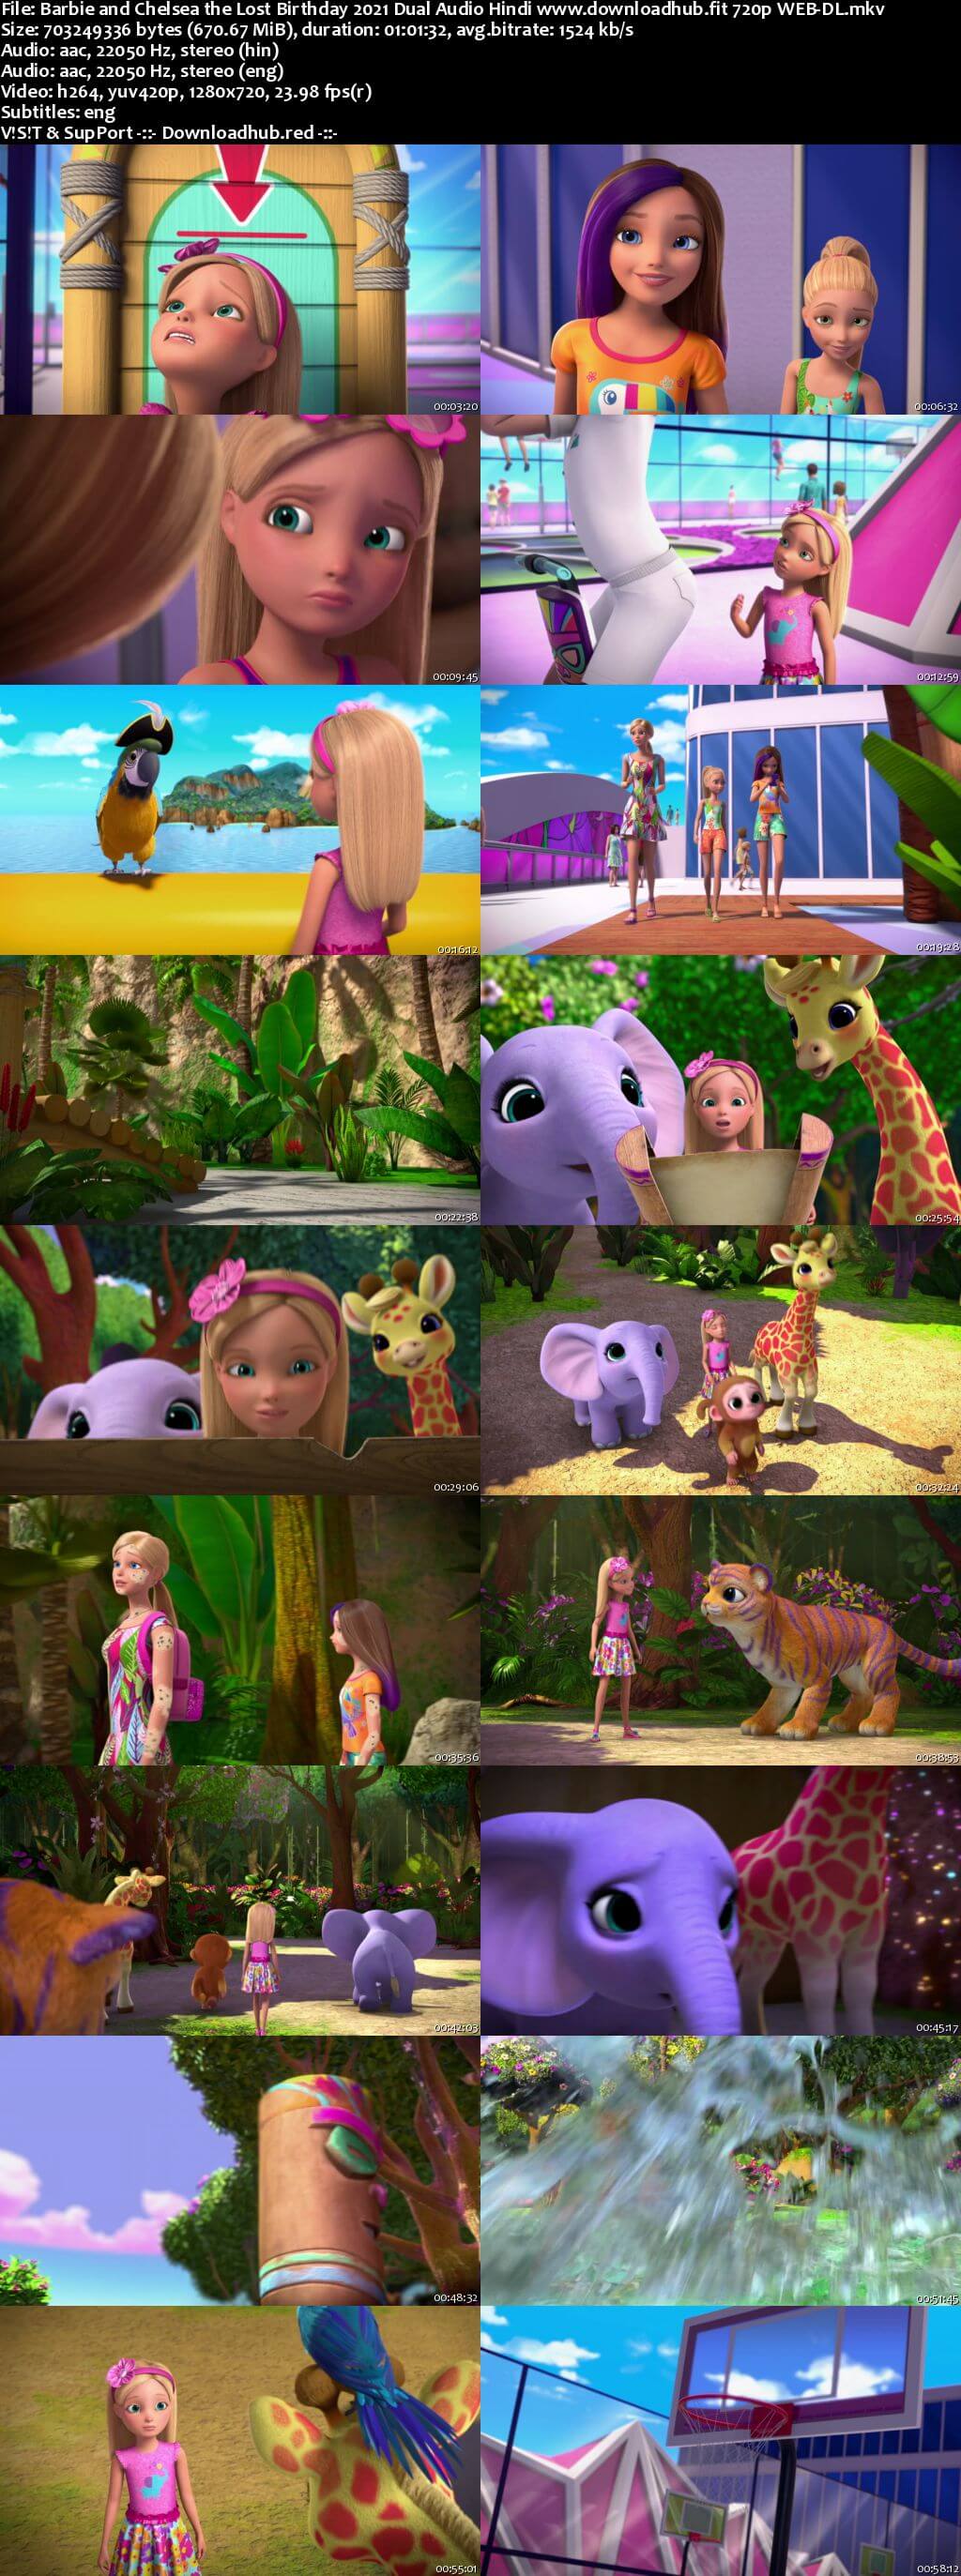 Barbie And Chelsea the Lost Birthday 2021 Hindi Dual Audio 720p Web-DL ESubs